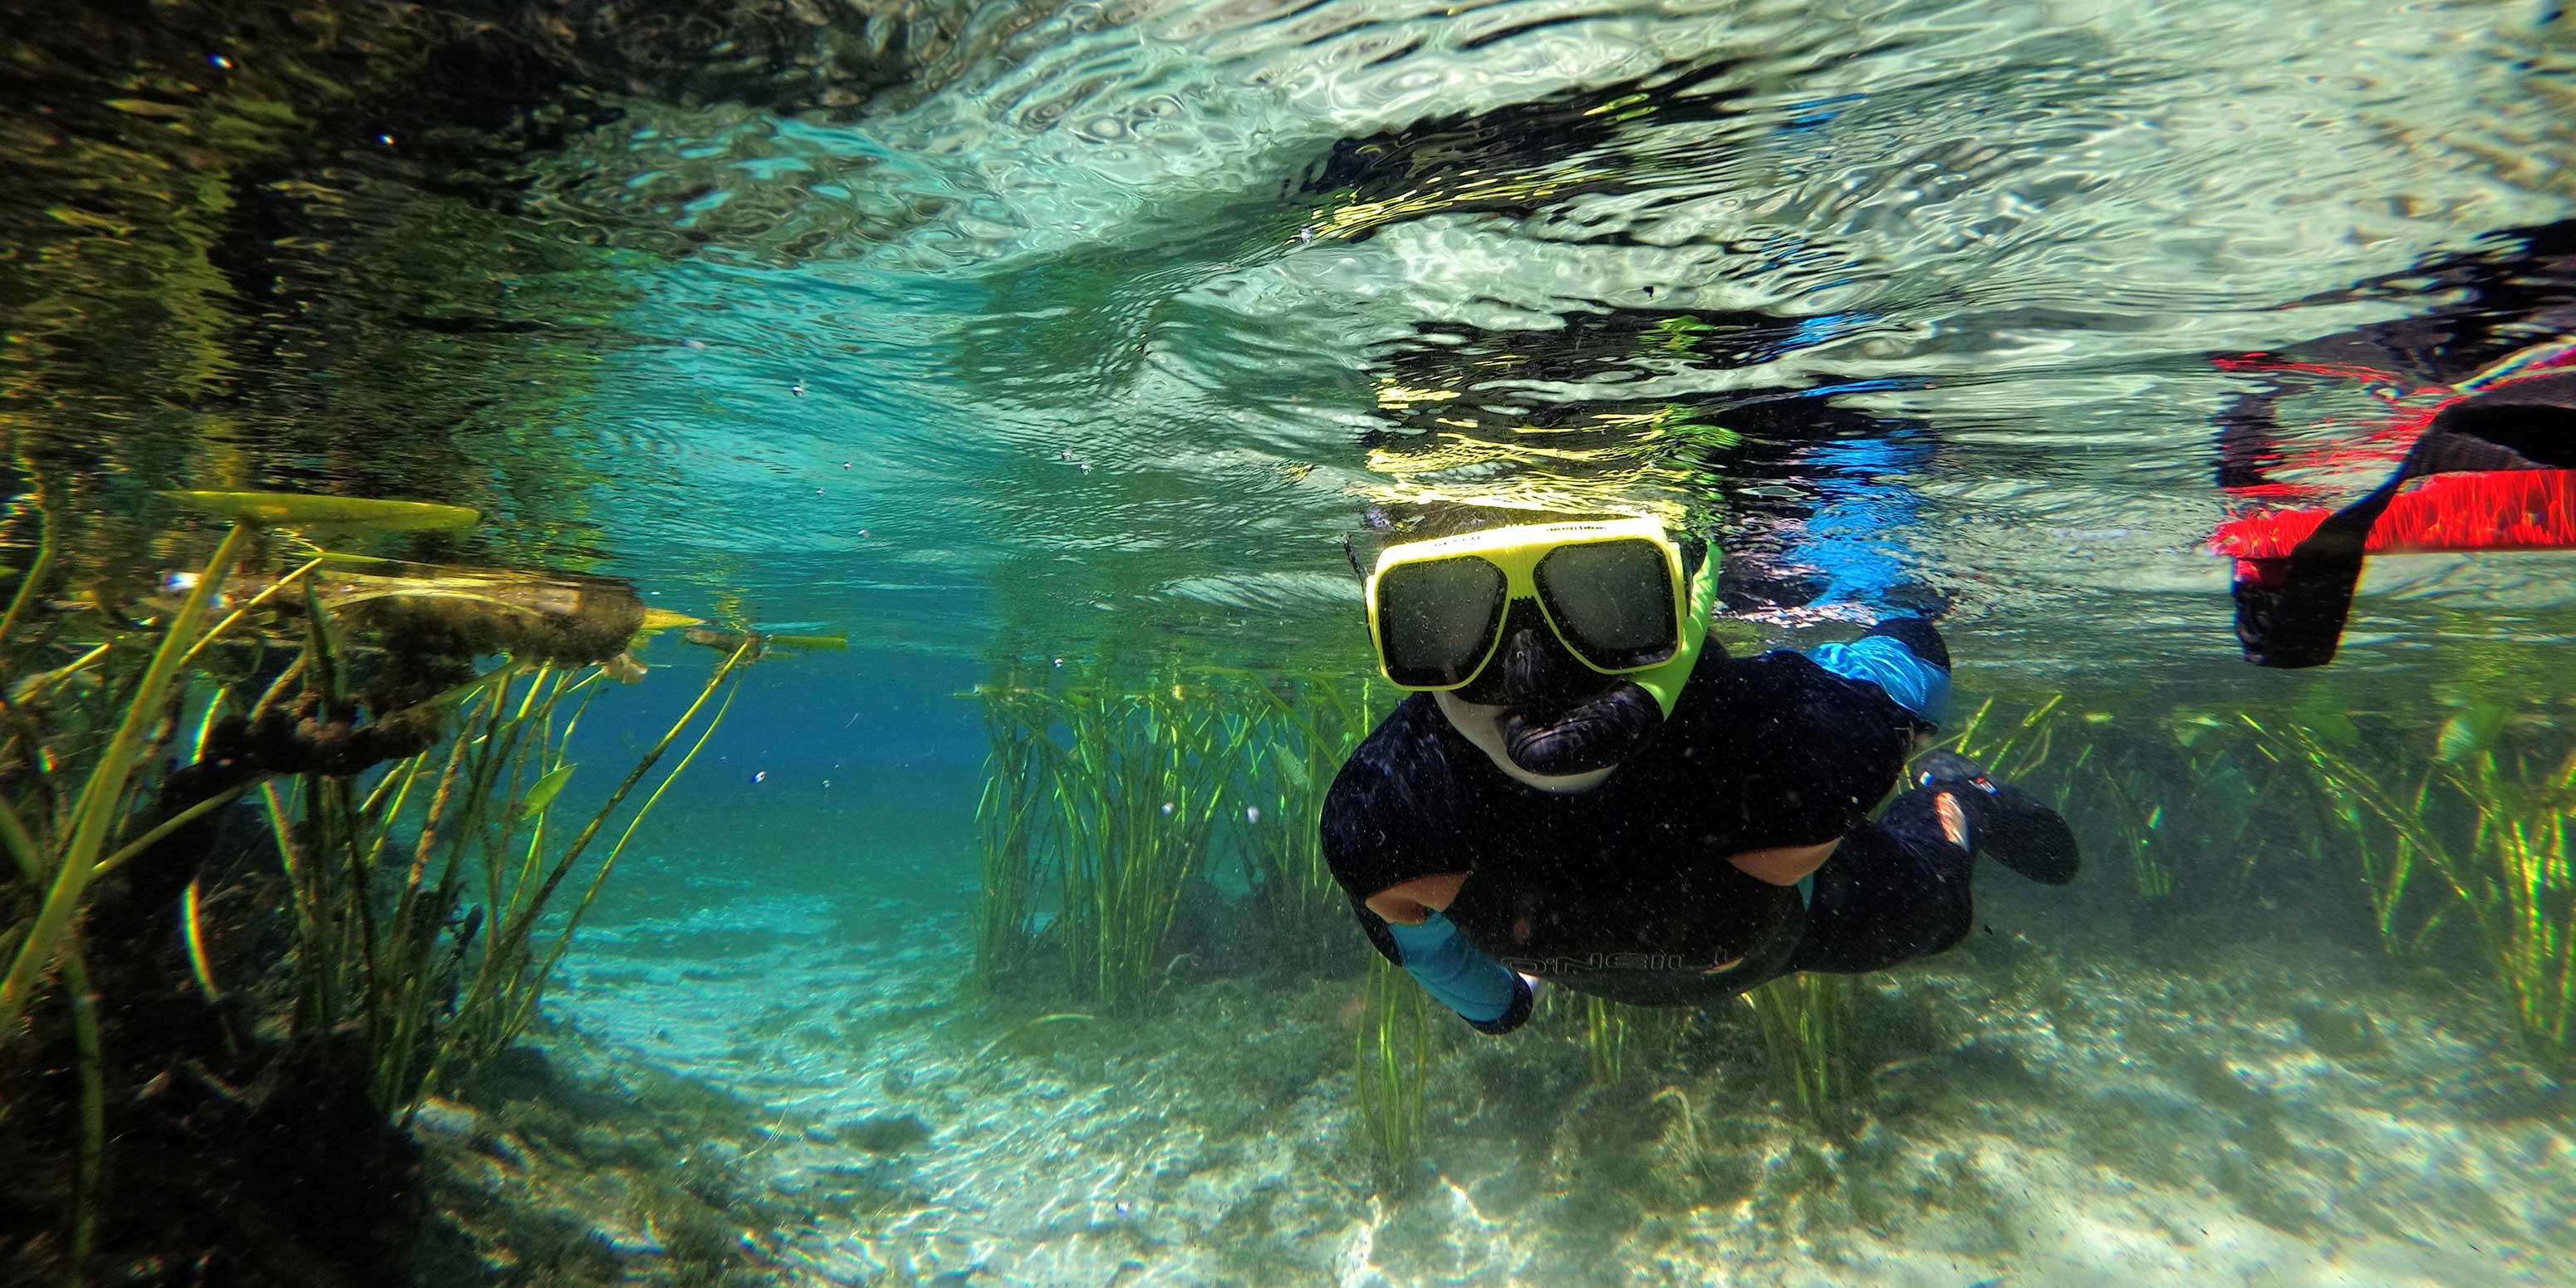 : In this underwater view, a school student wearing goggles, a snorkel, and a wetsuit swims just under the surface, with grasses in the background.